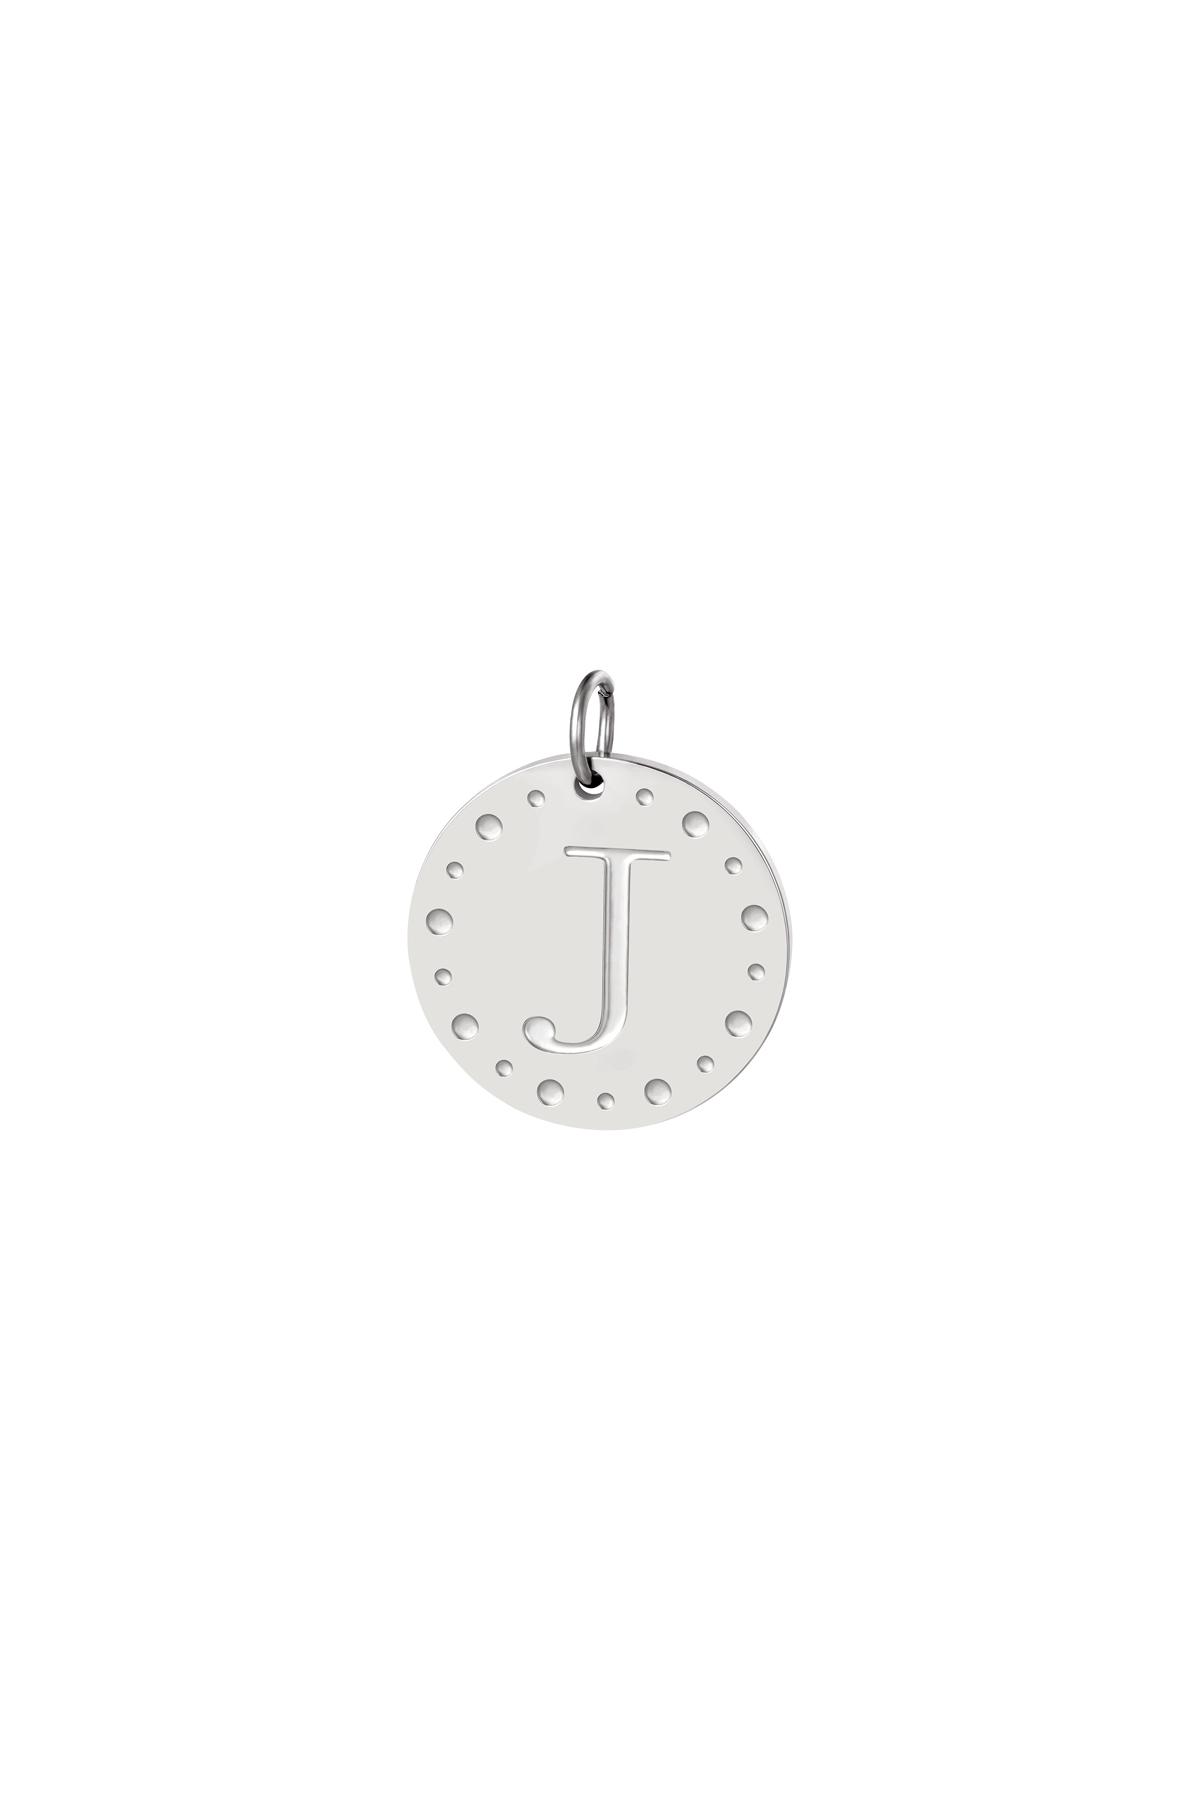 Circle charm initial J Silver Stainless Steel